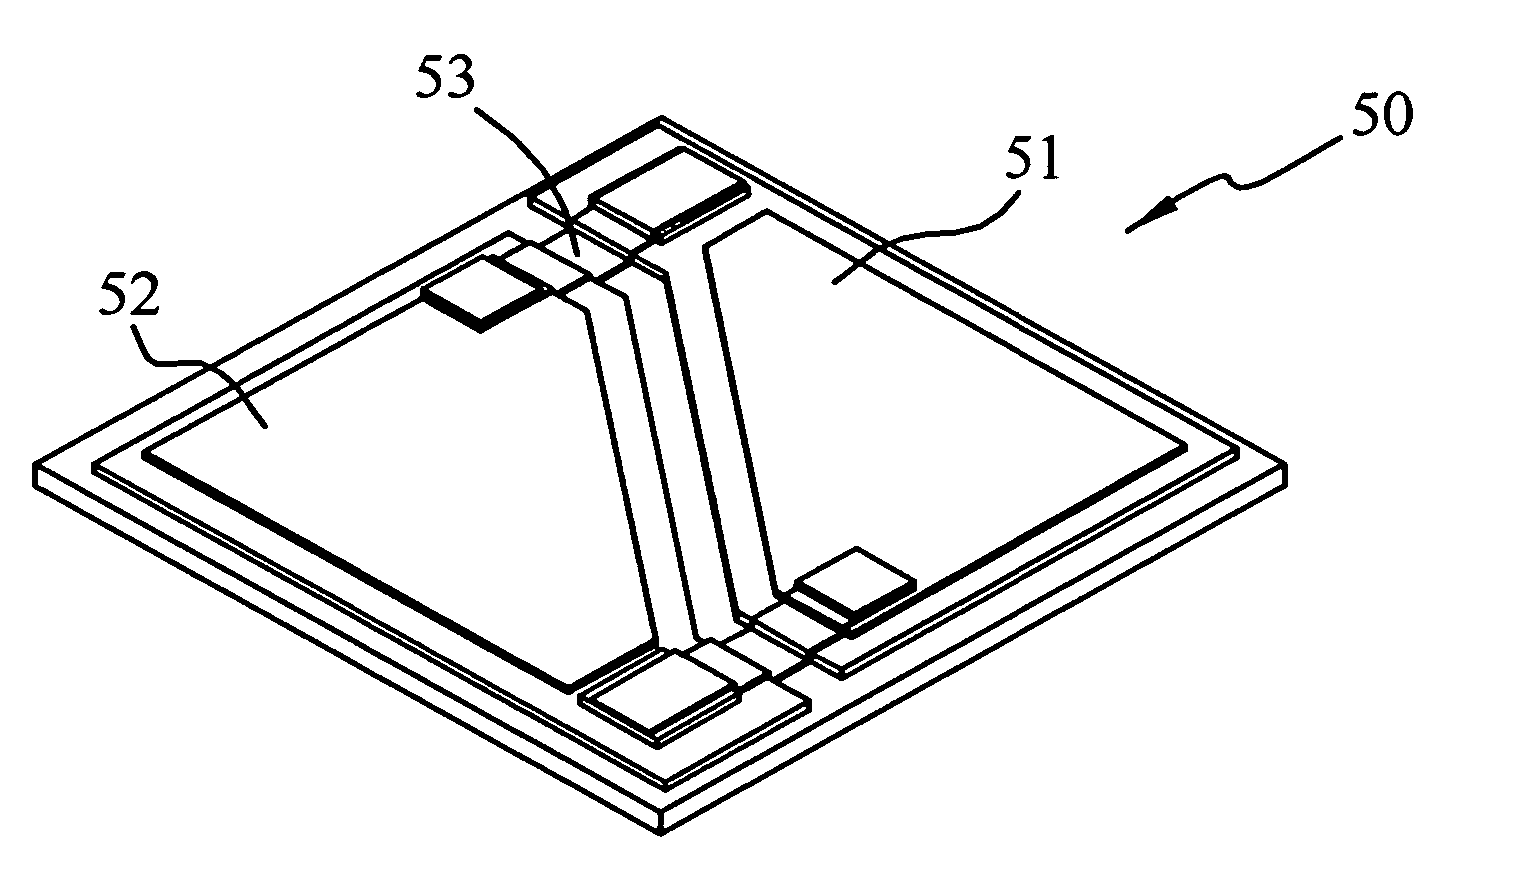 Structure of AC light-emitting diode dies